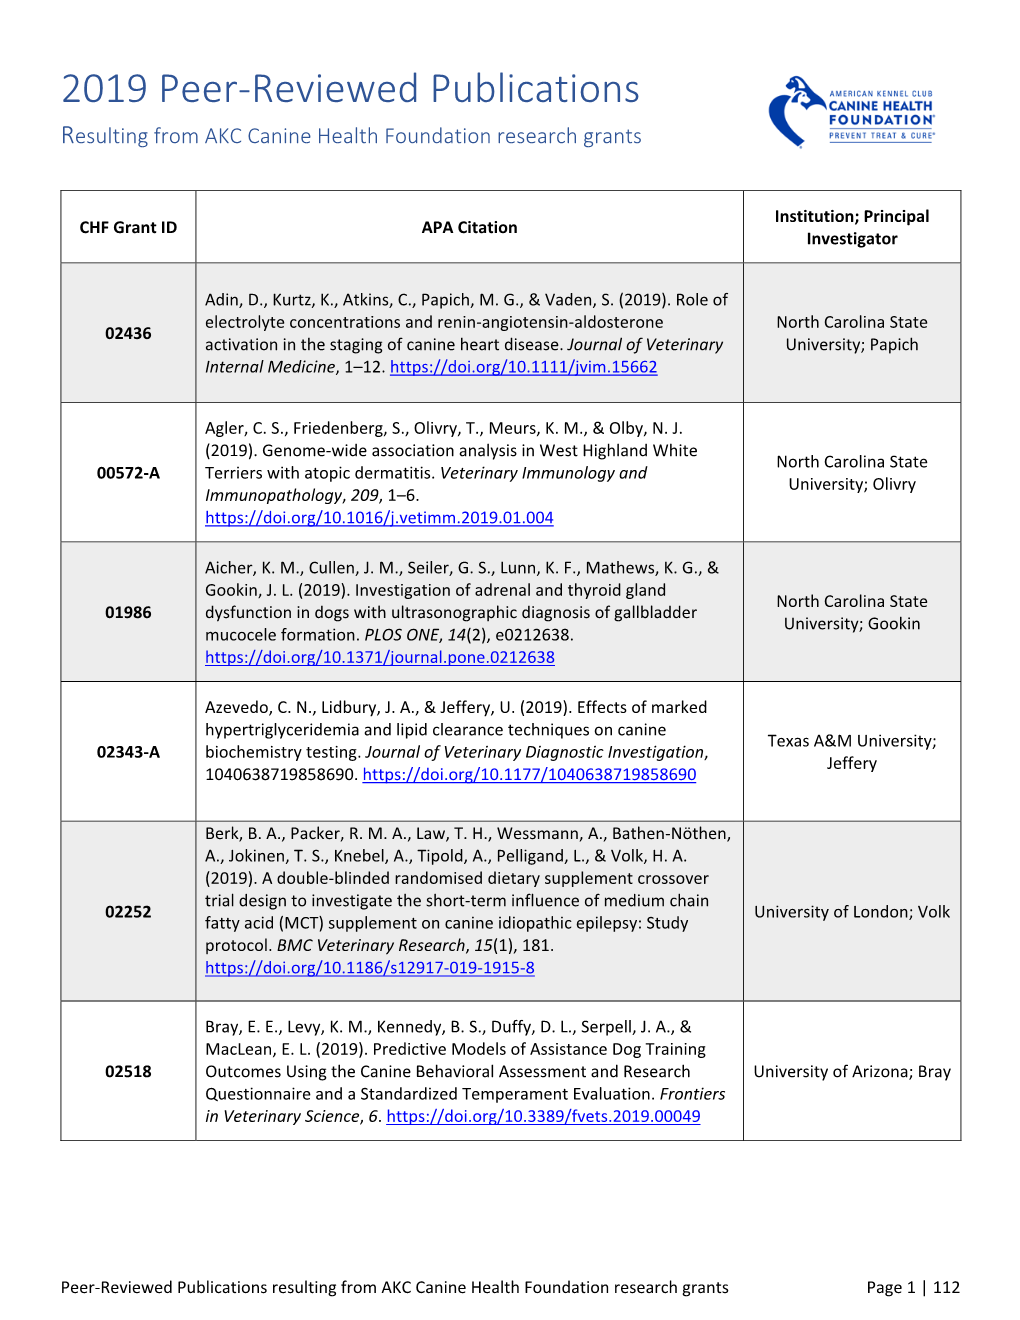 2019 Peer‐Reviewed Publications Resulting from AKC Canine Health Foundation Research Grants